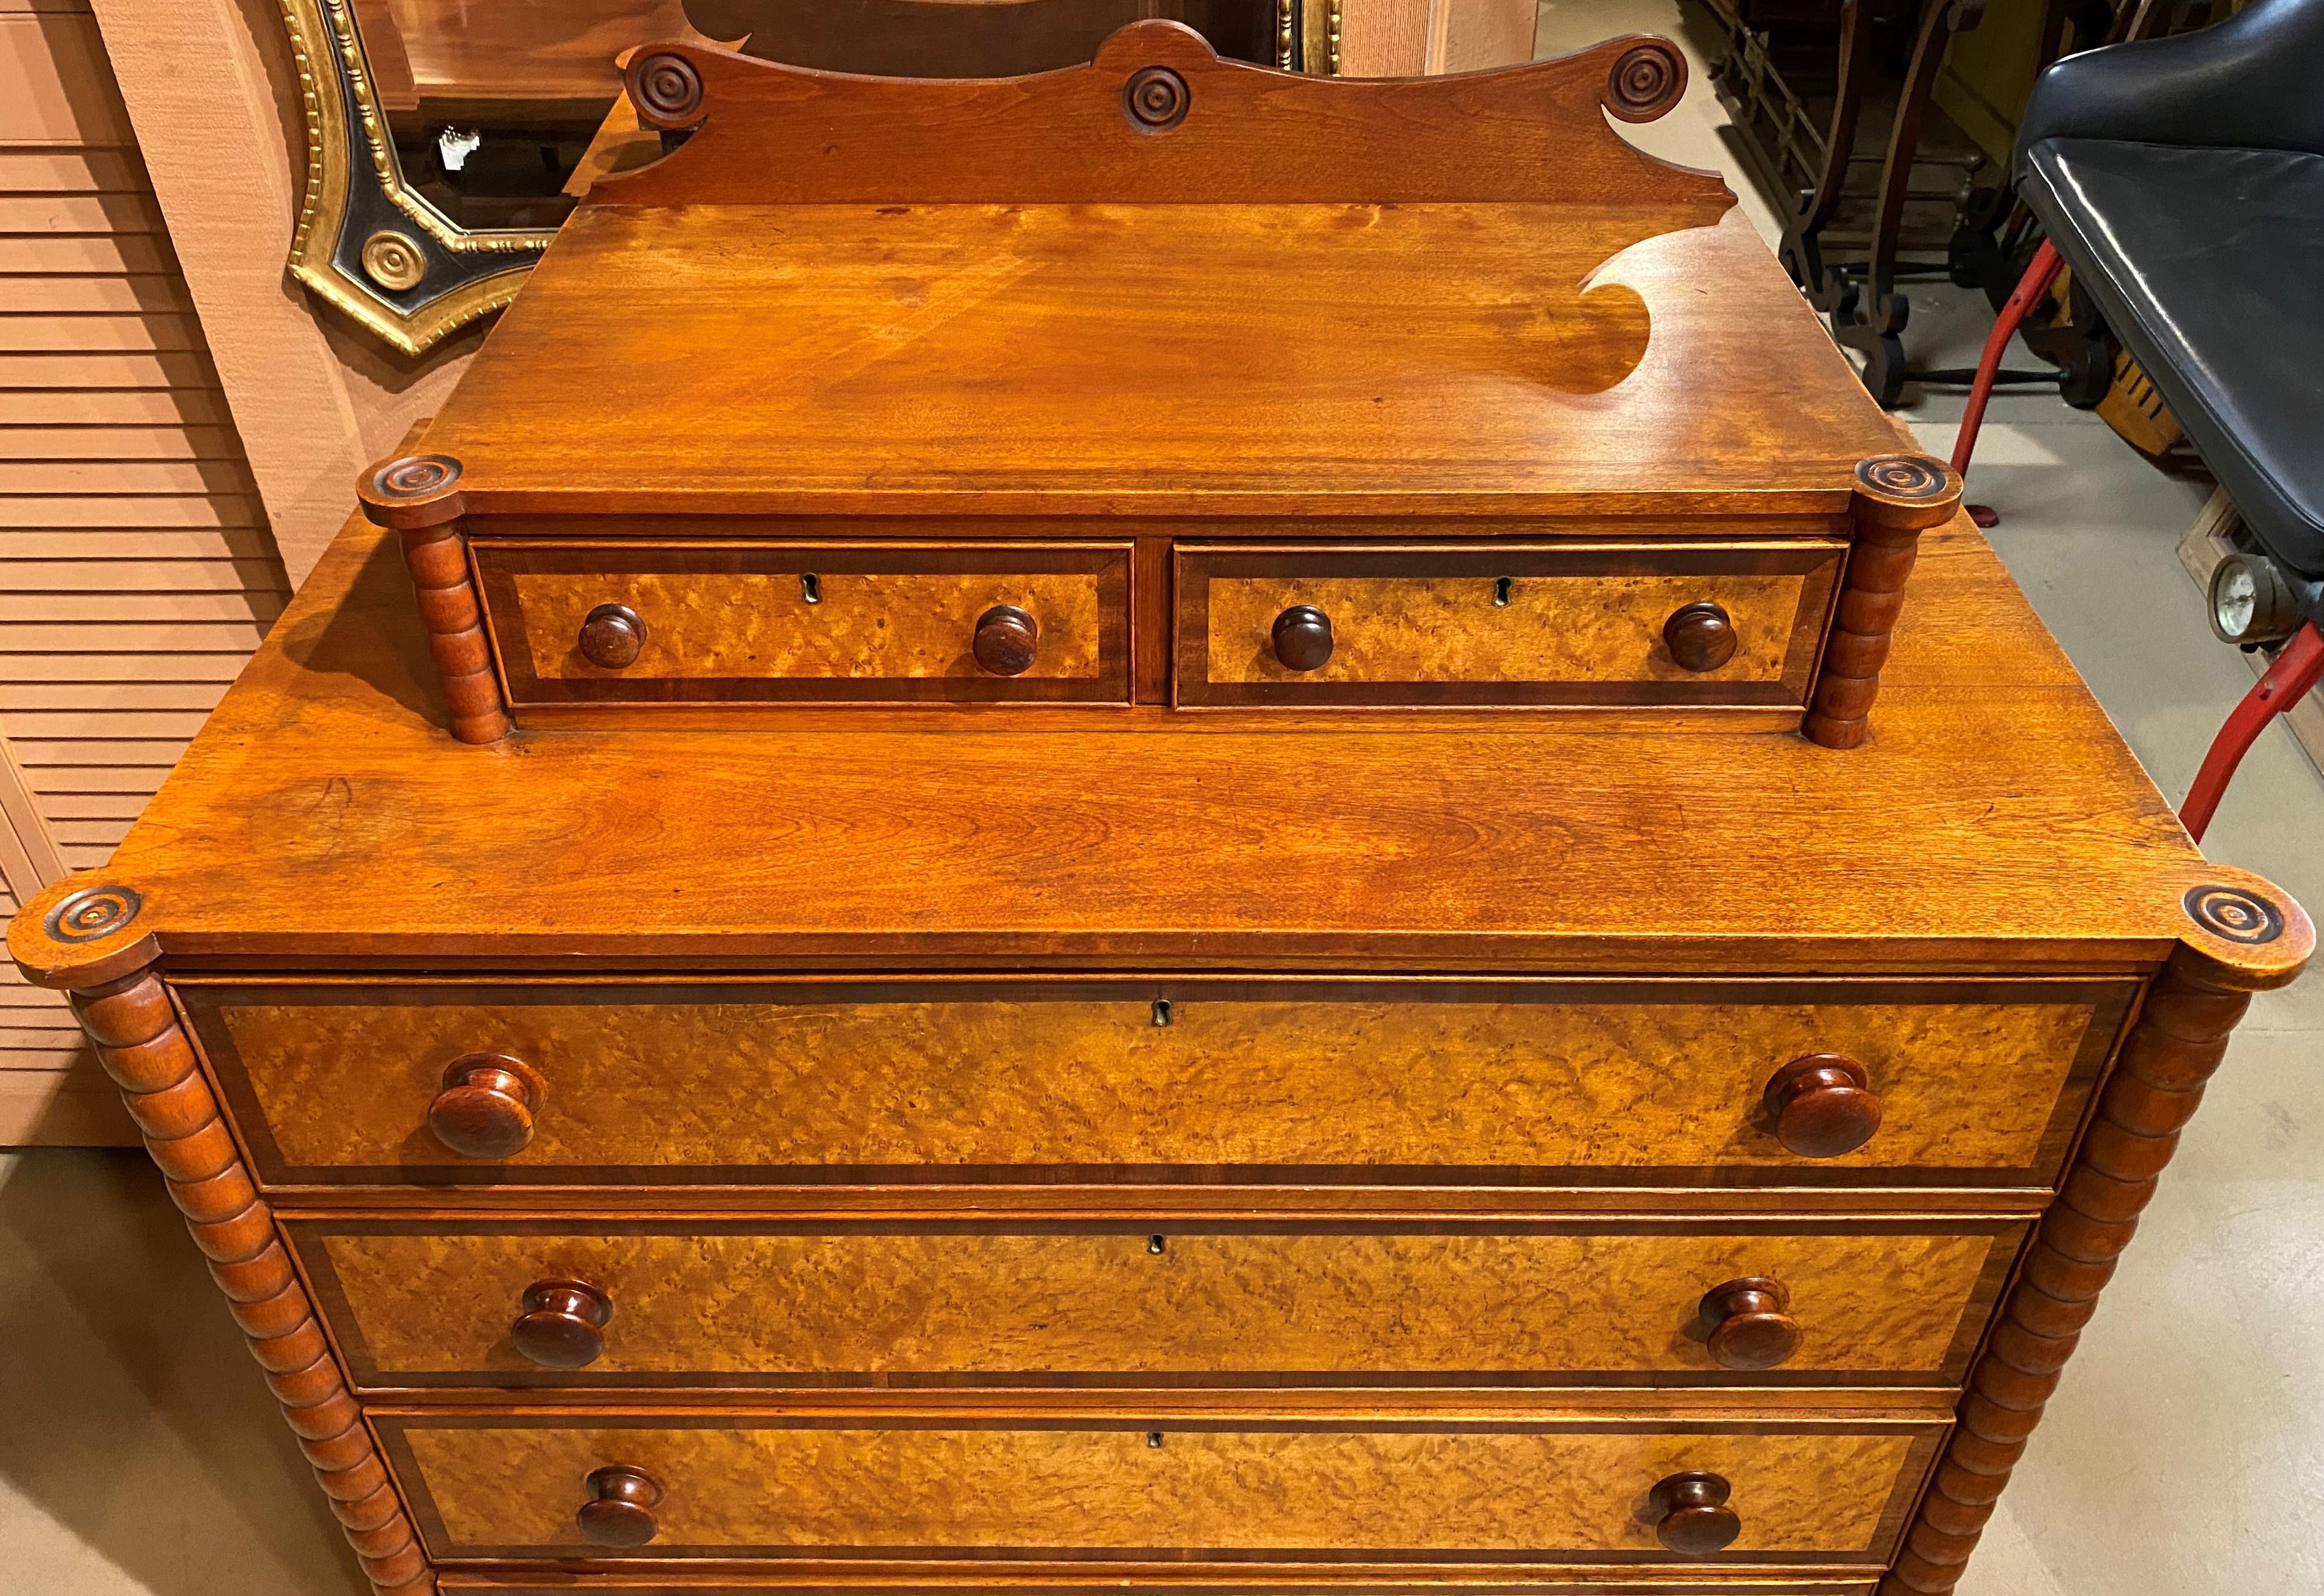 A fine 19th century Sheraton chest with a carved crest featuring bullseye decoration, surmounting two glove boxes over a case with turreted corners, four graduated drawers with bird's eye maple veneer drawer fronts with mahogany veneer borders,